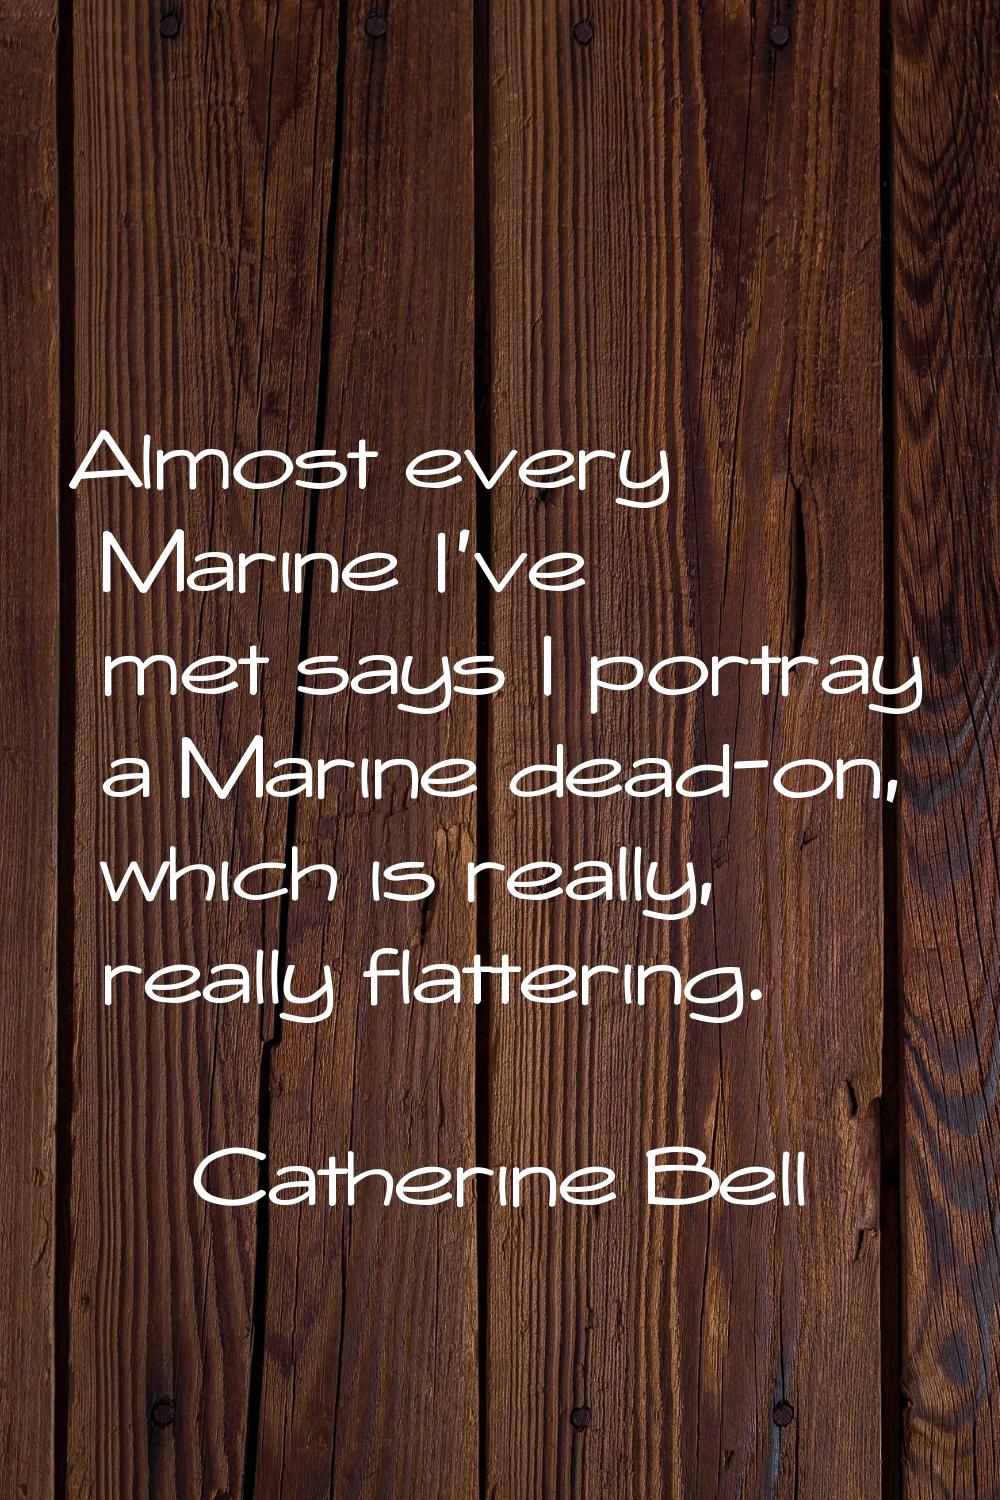 Almost every Marine I've met says I portray a Marine dead-on, which is really, really flattering.